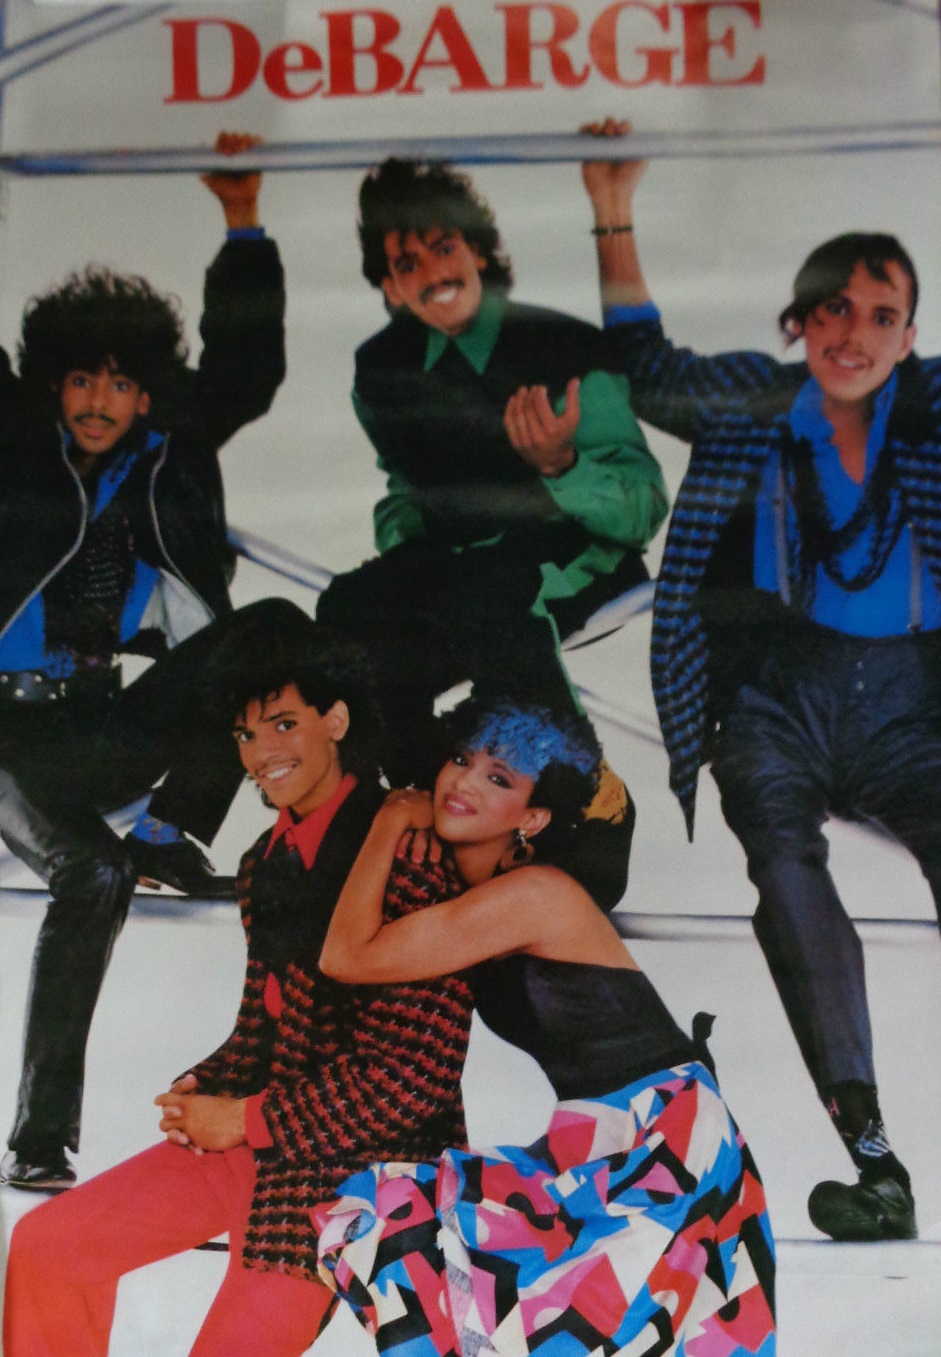 Top Of The Pops 80s: Debarge - Rhythm of the Night Album - 1985